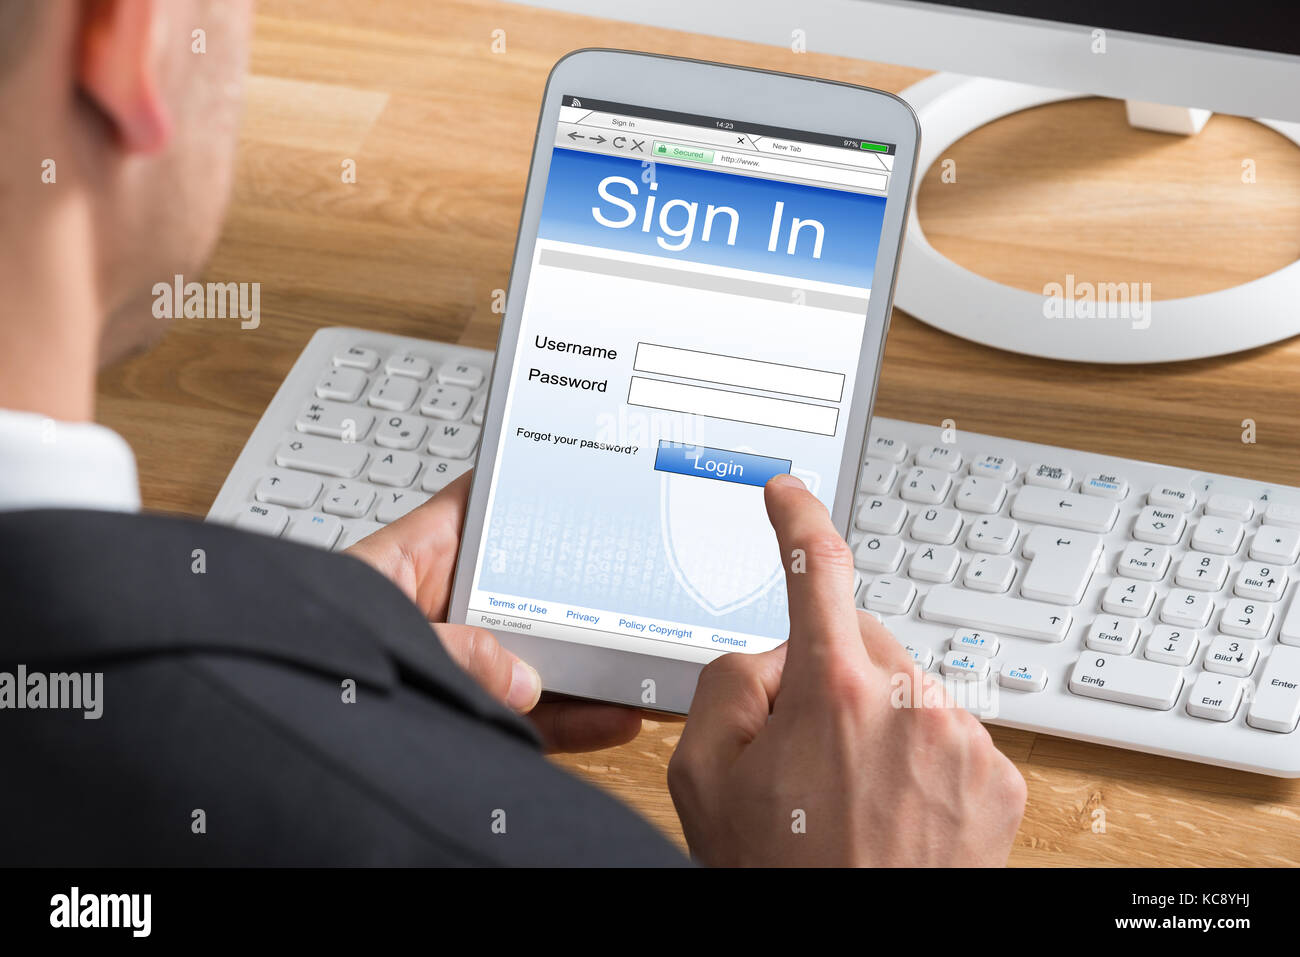 Close-up Of Young Businessman Signing Into Website Using Digital Tablet At Computer Desk Stock Photo